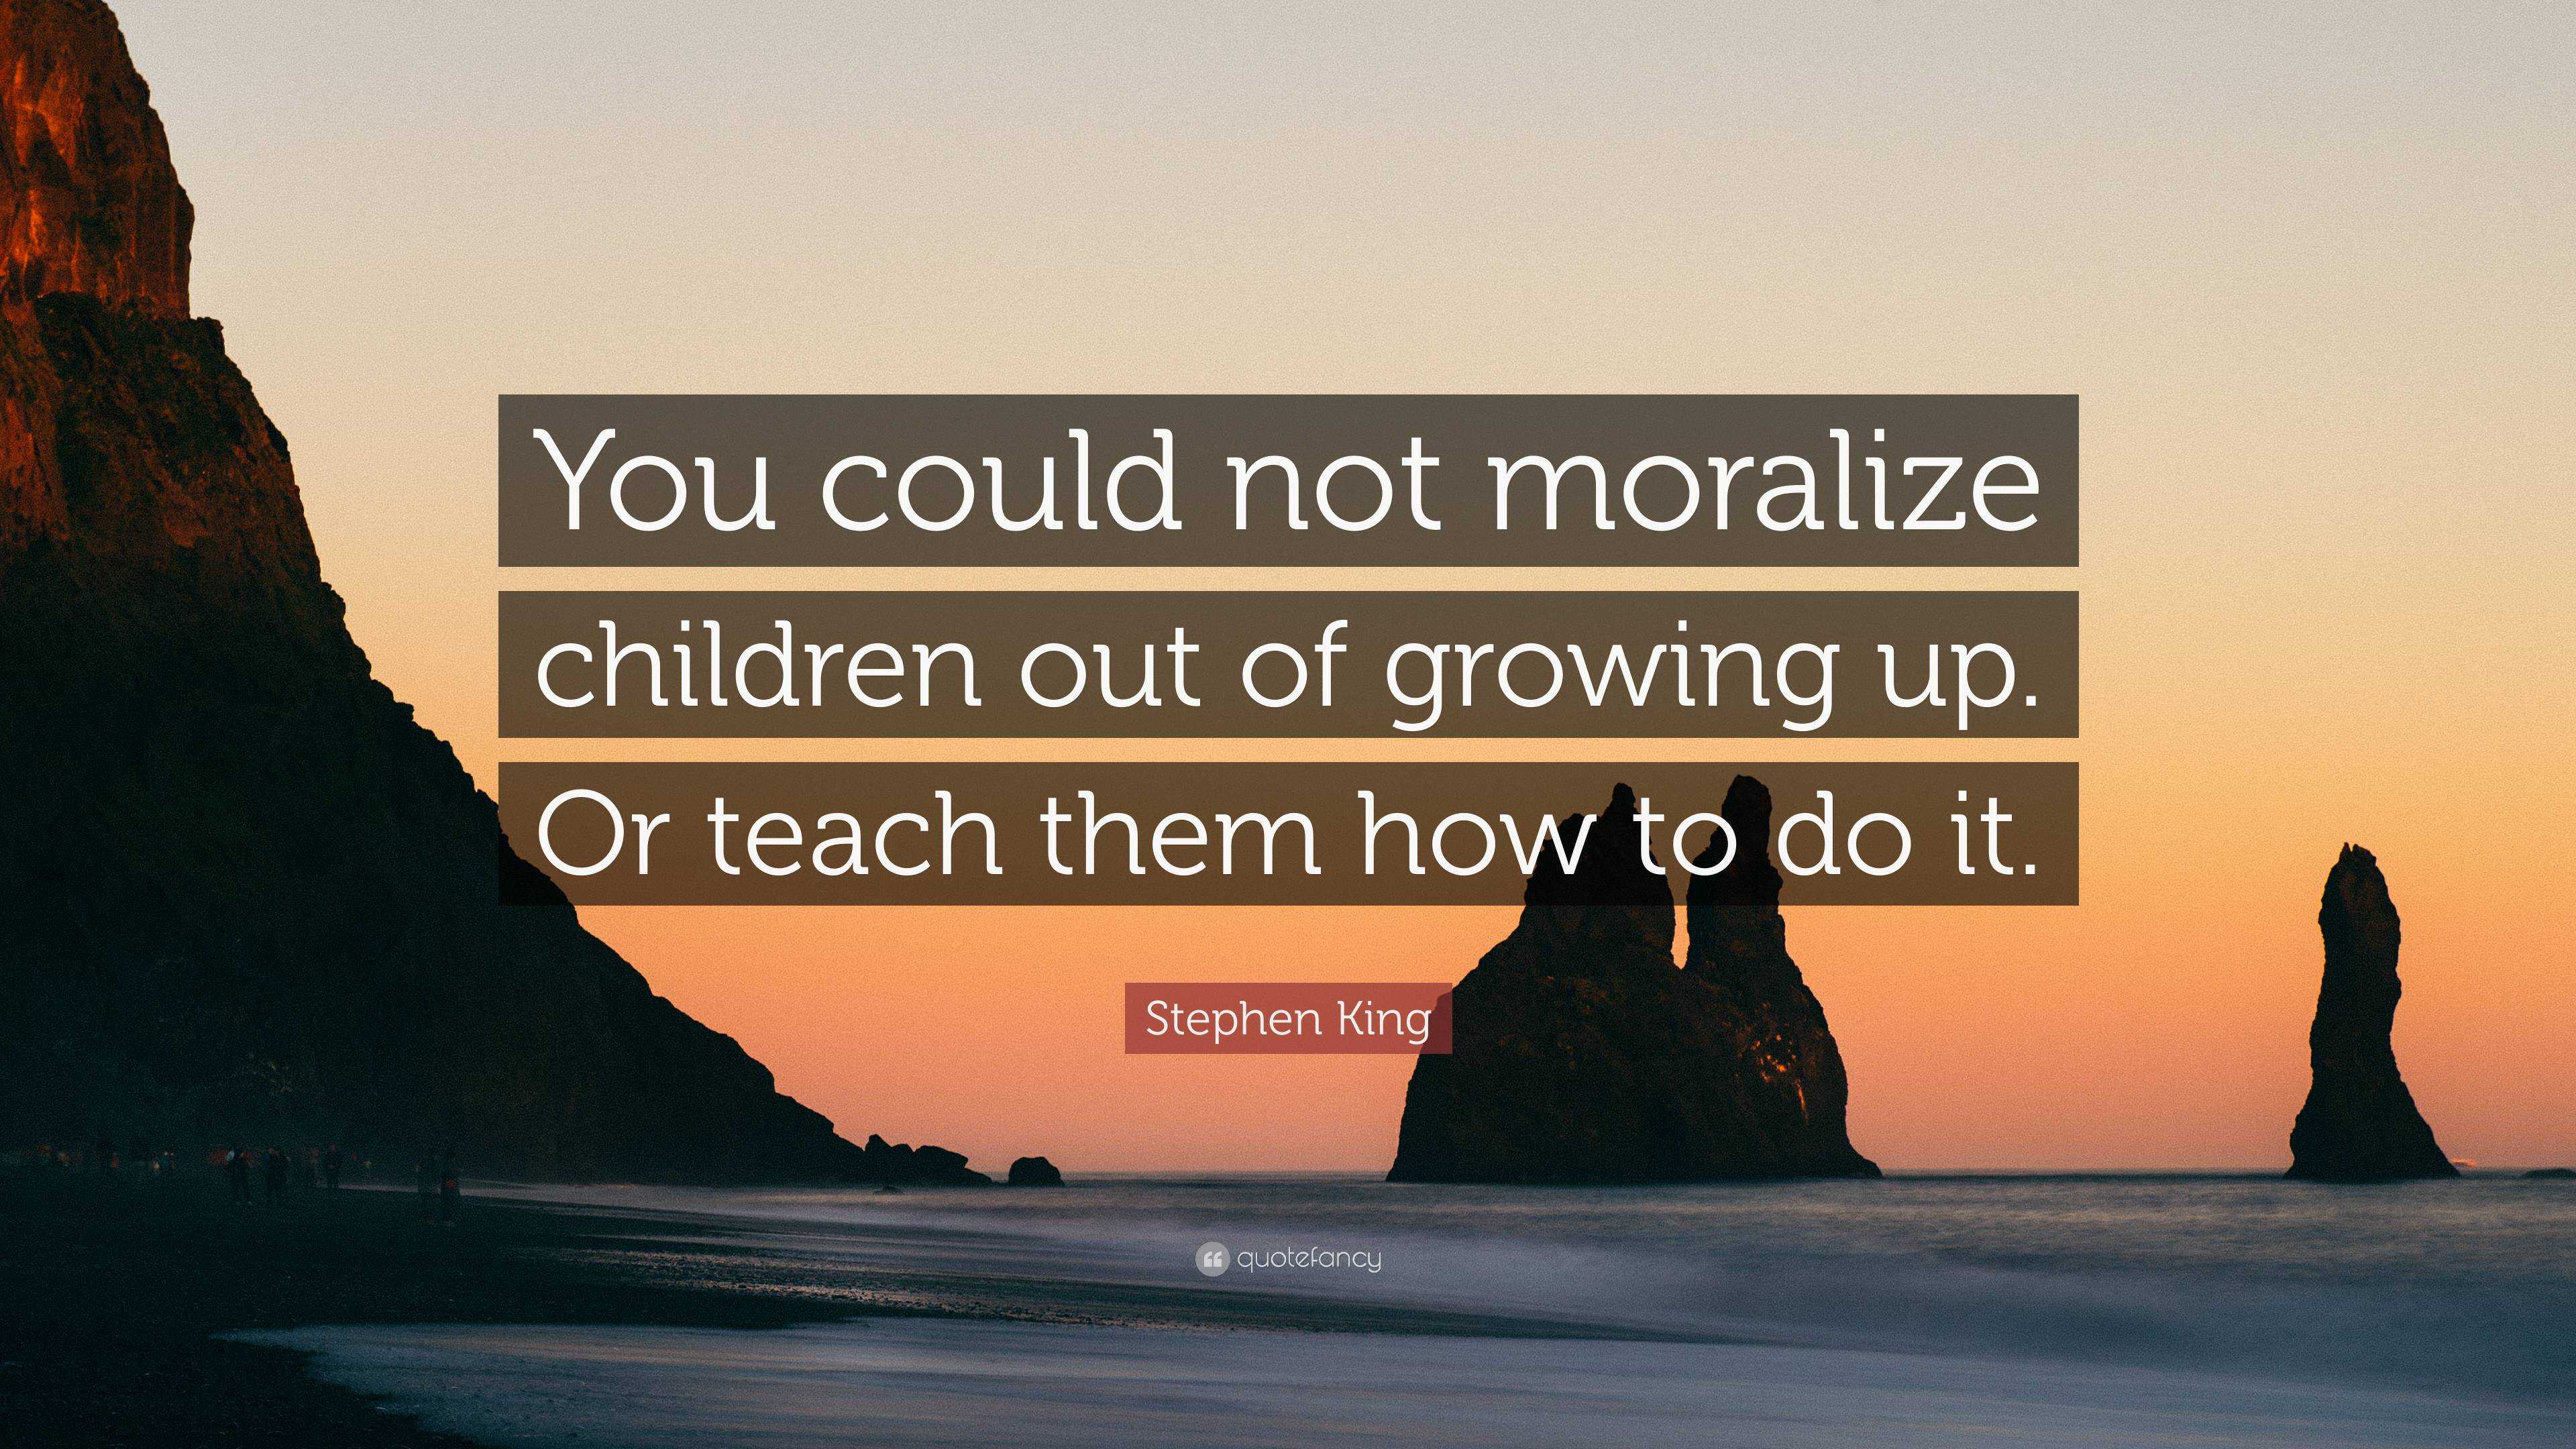 Stephen King Quote: “You could not moralize children out of growing up ...